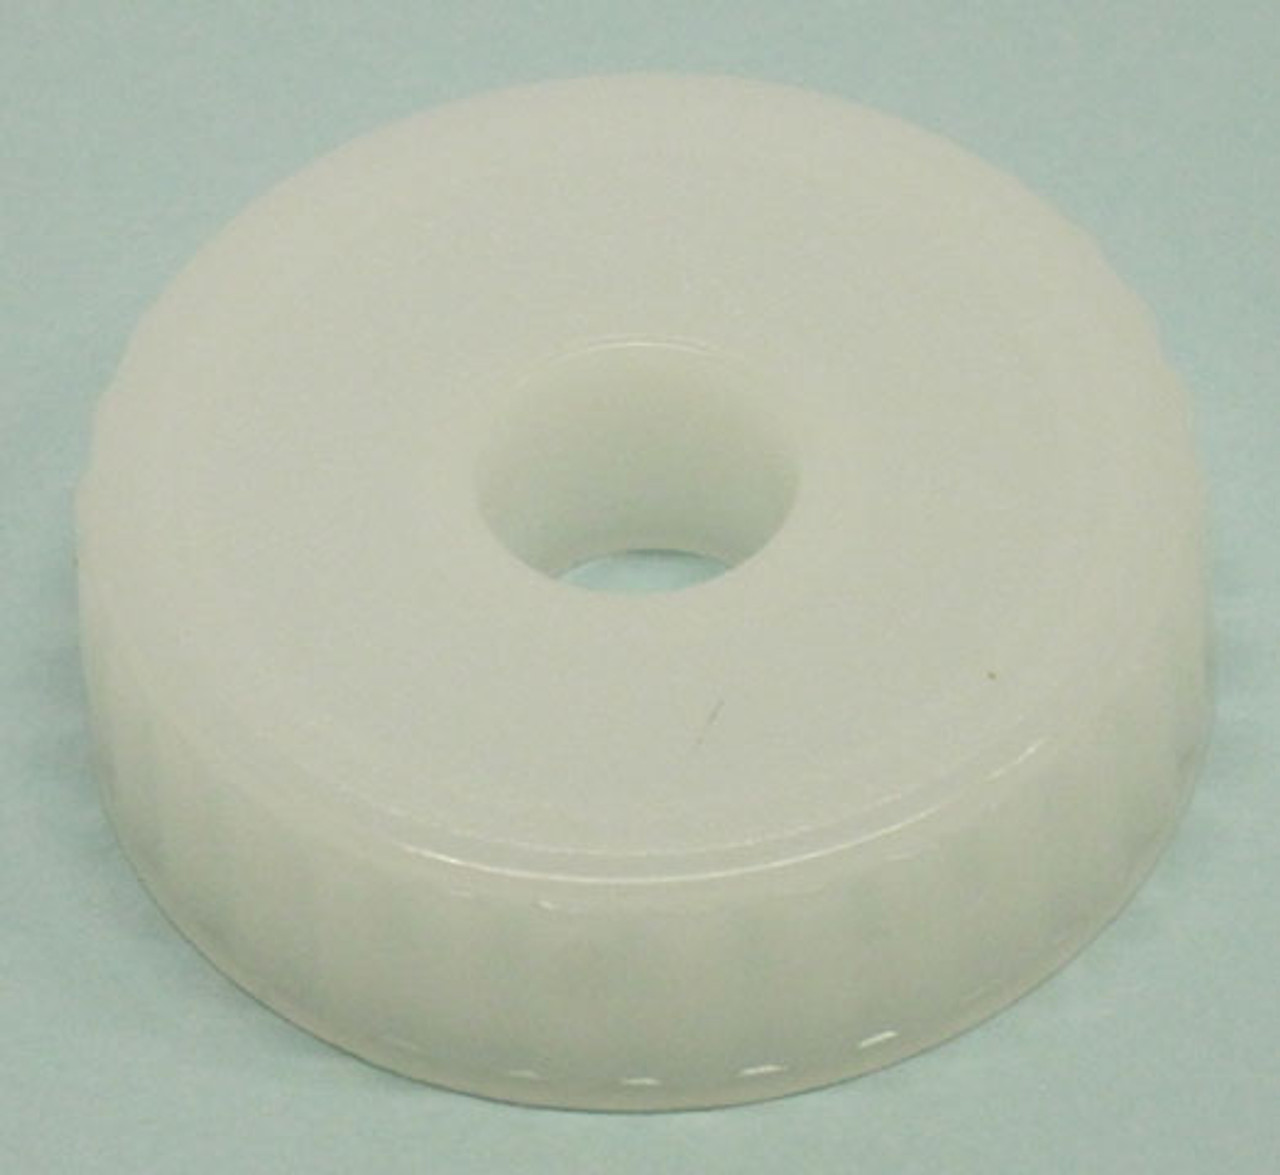 38mm Plastic Screw Cap with Molded Hole